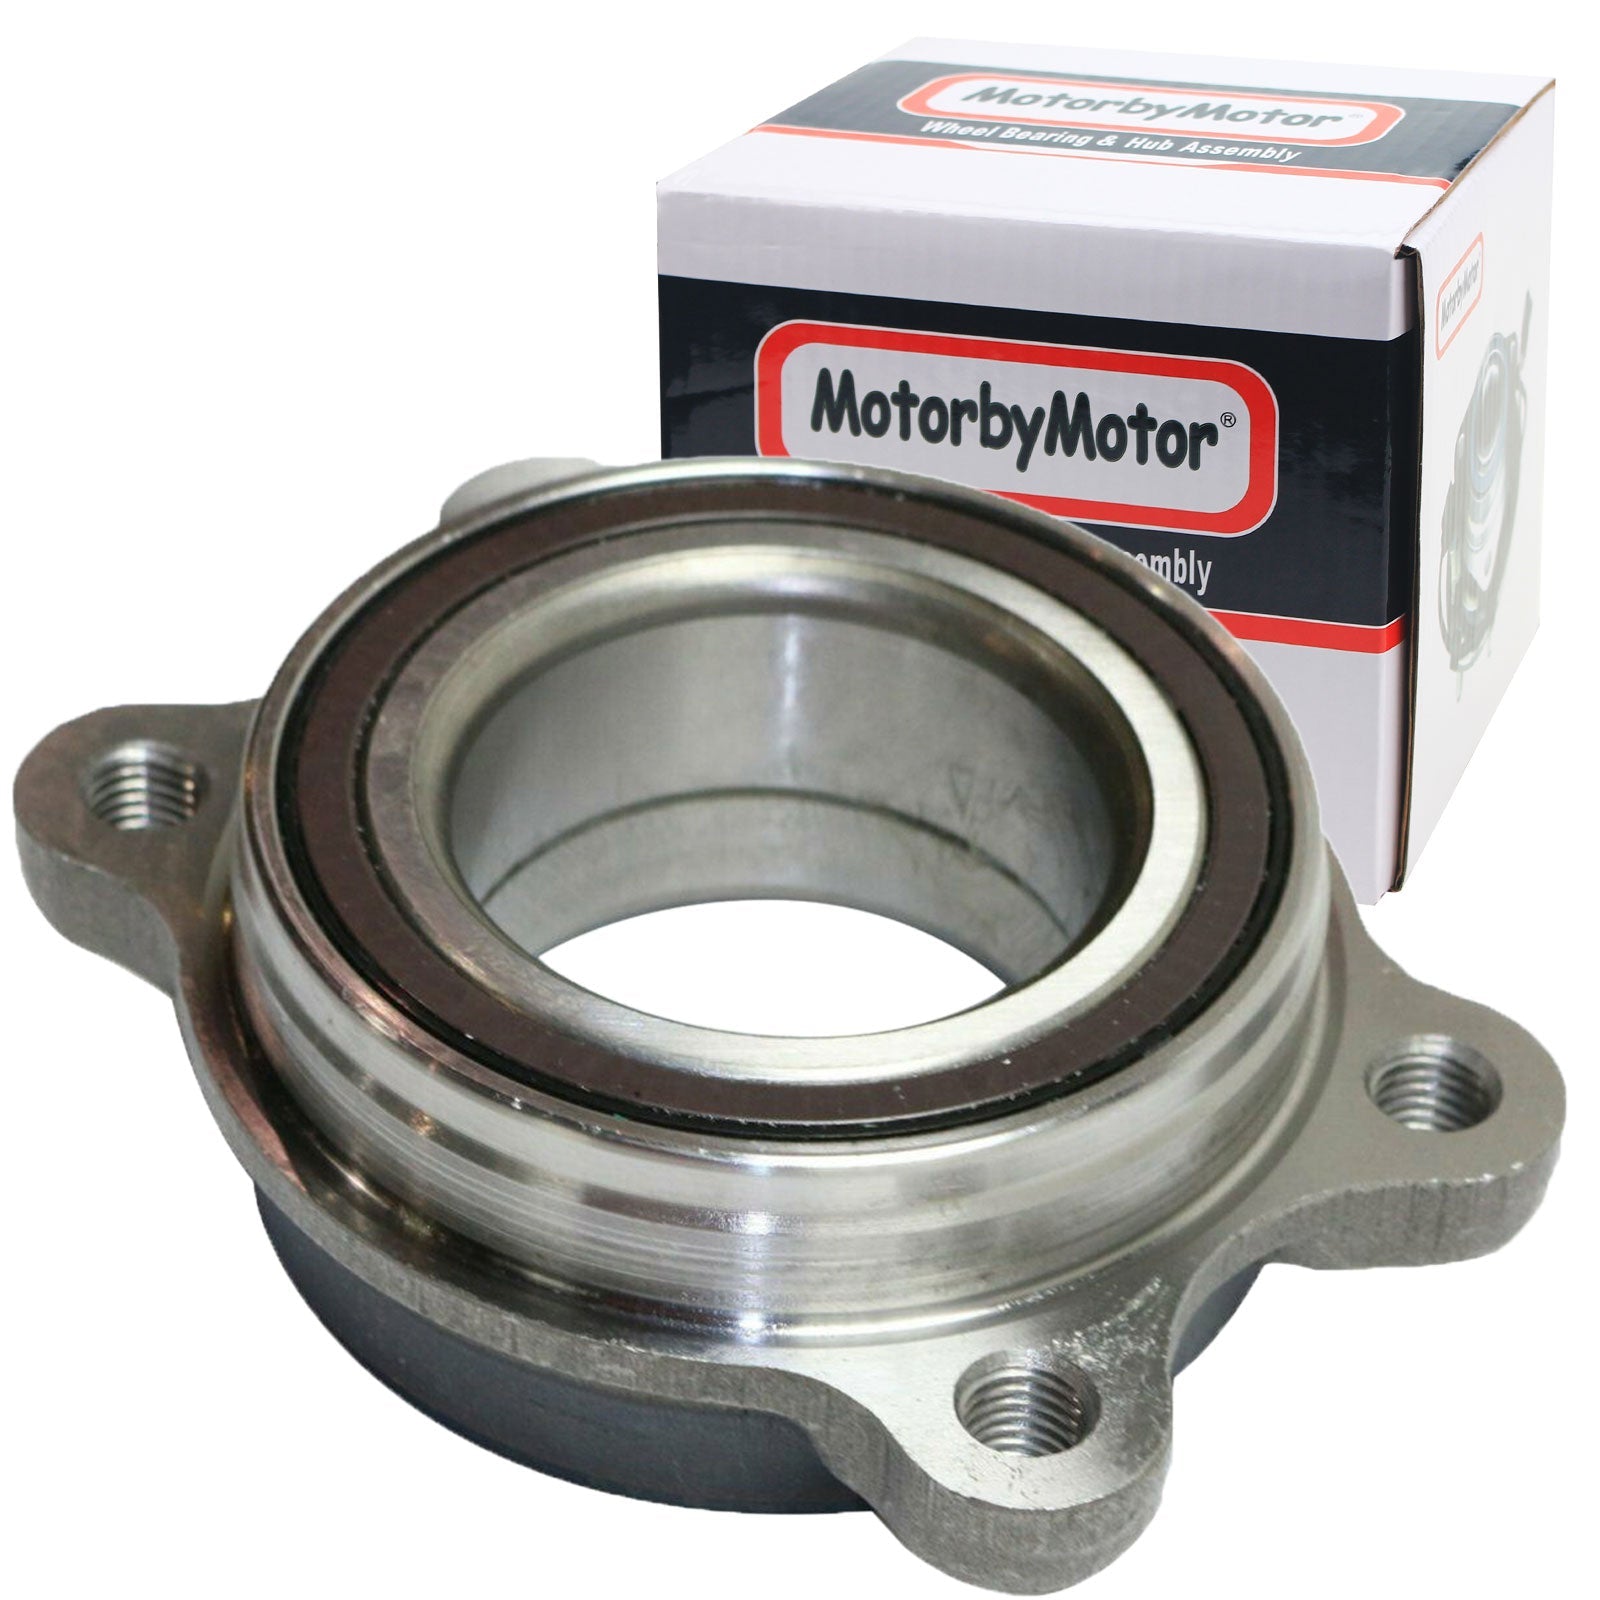 MotorbyMotor 513301 Front Wheel Bearing and Hub Assembly Fit for Audi A4 Quattro A4 Q5 S5 S4 A7 A8 allroad S6 SQ5 A5 A6 RS5 RS7 S7 S8 Low-Runout OE Directly Replacement Hub Bearing w/ABS MotorbyMotor